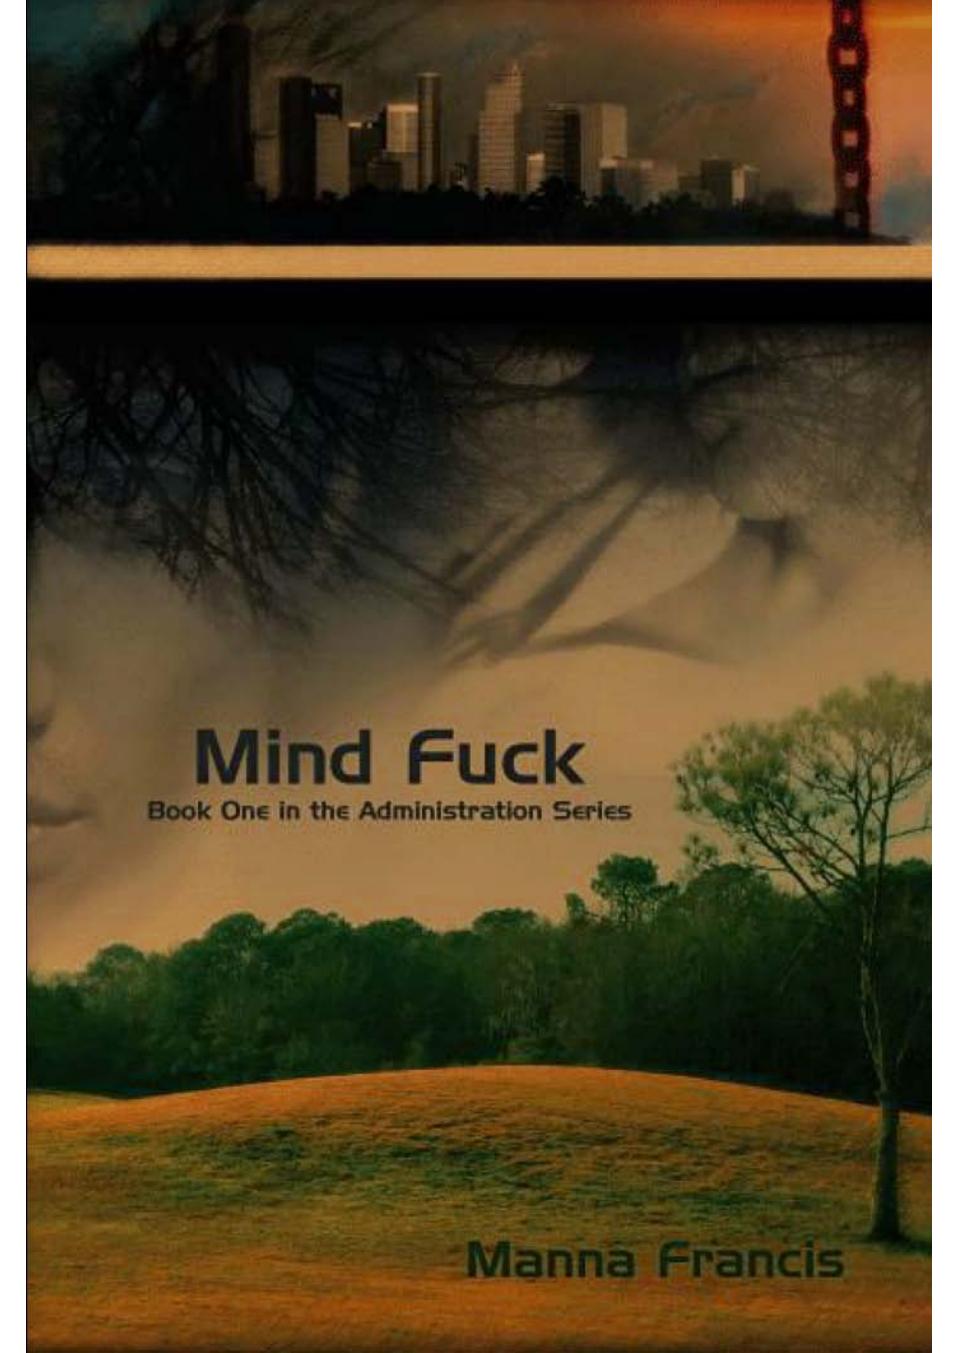 Mind Fuck by Manna Francis